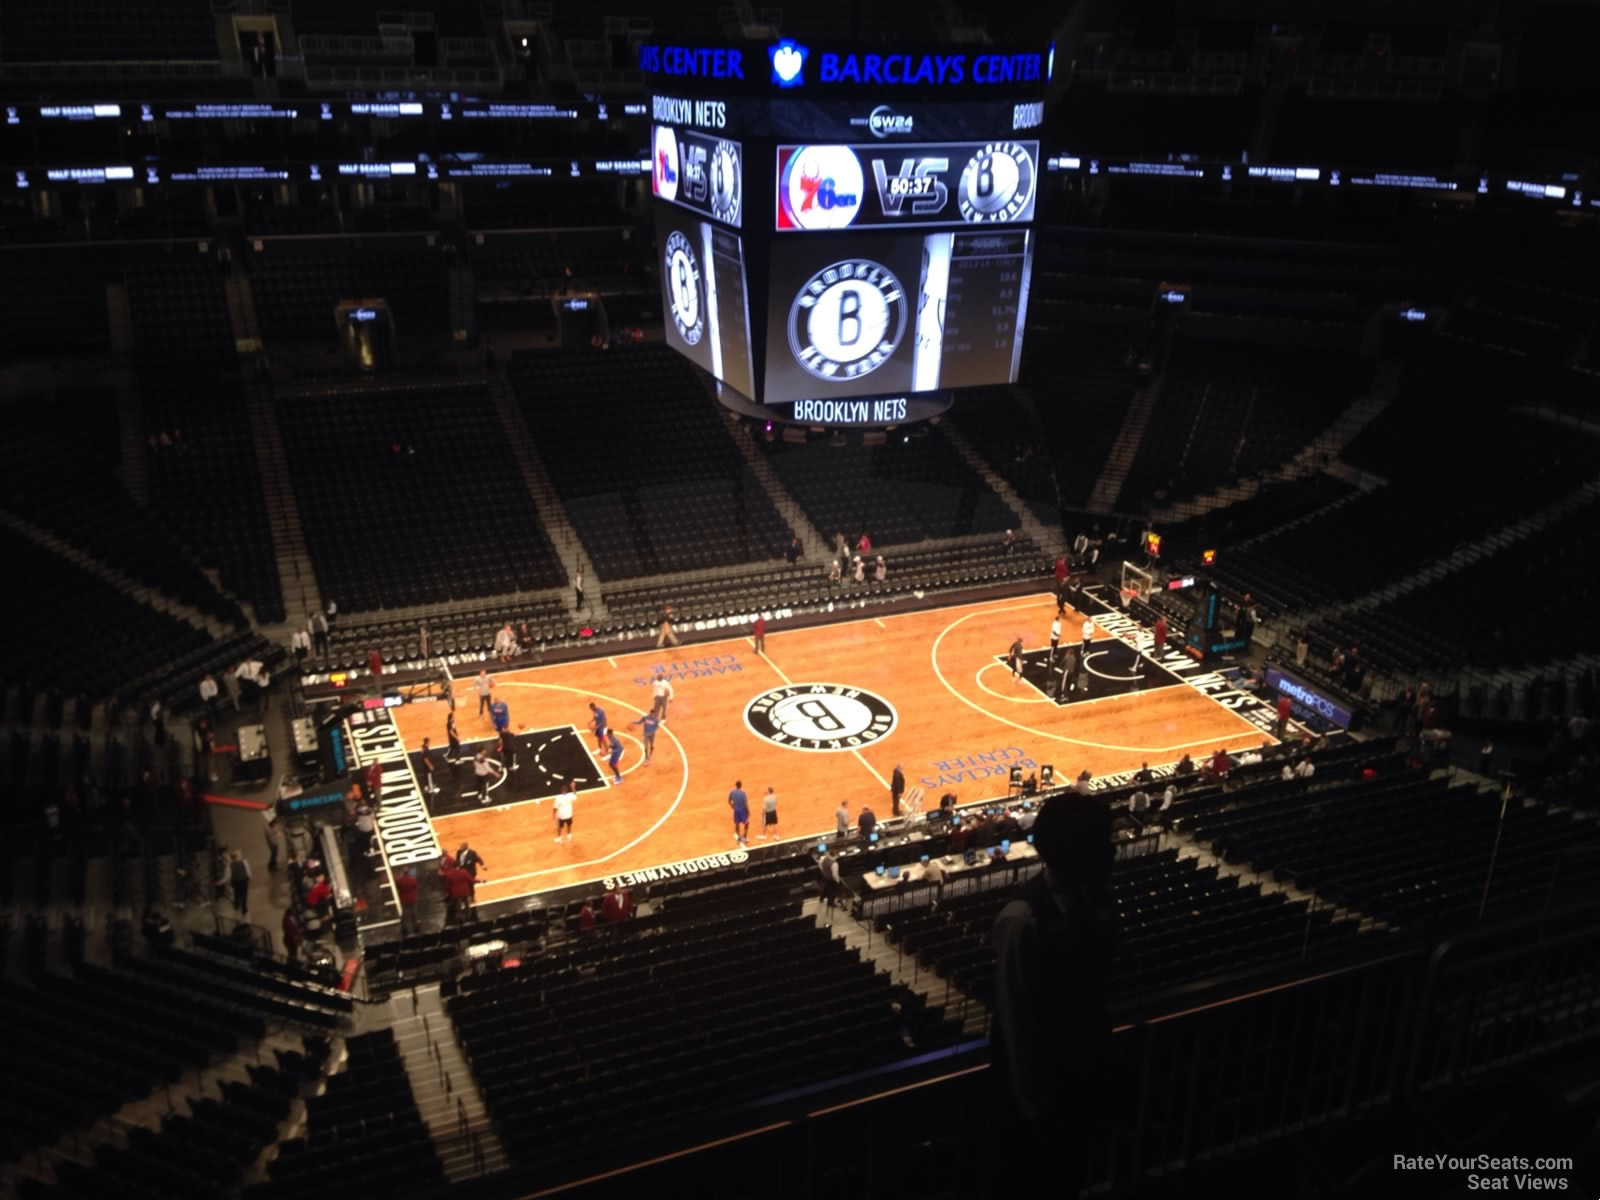 Barclays Center: Is Floor 6 view significantly better than Section